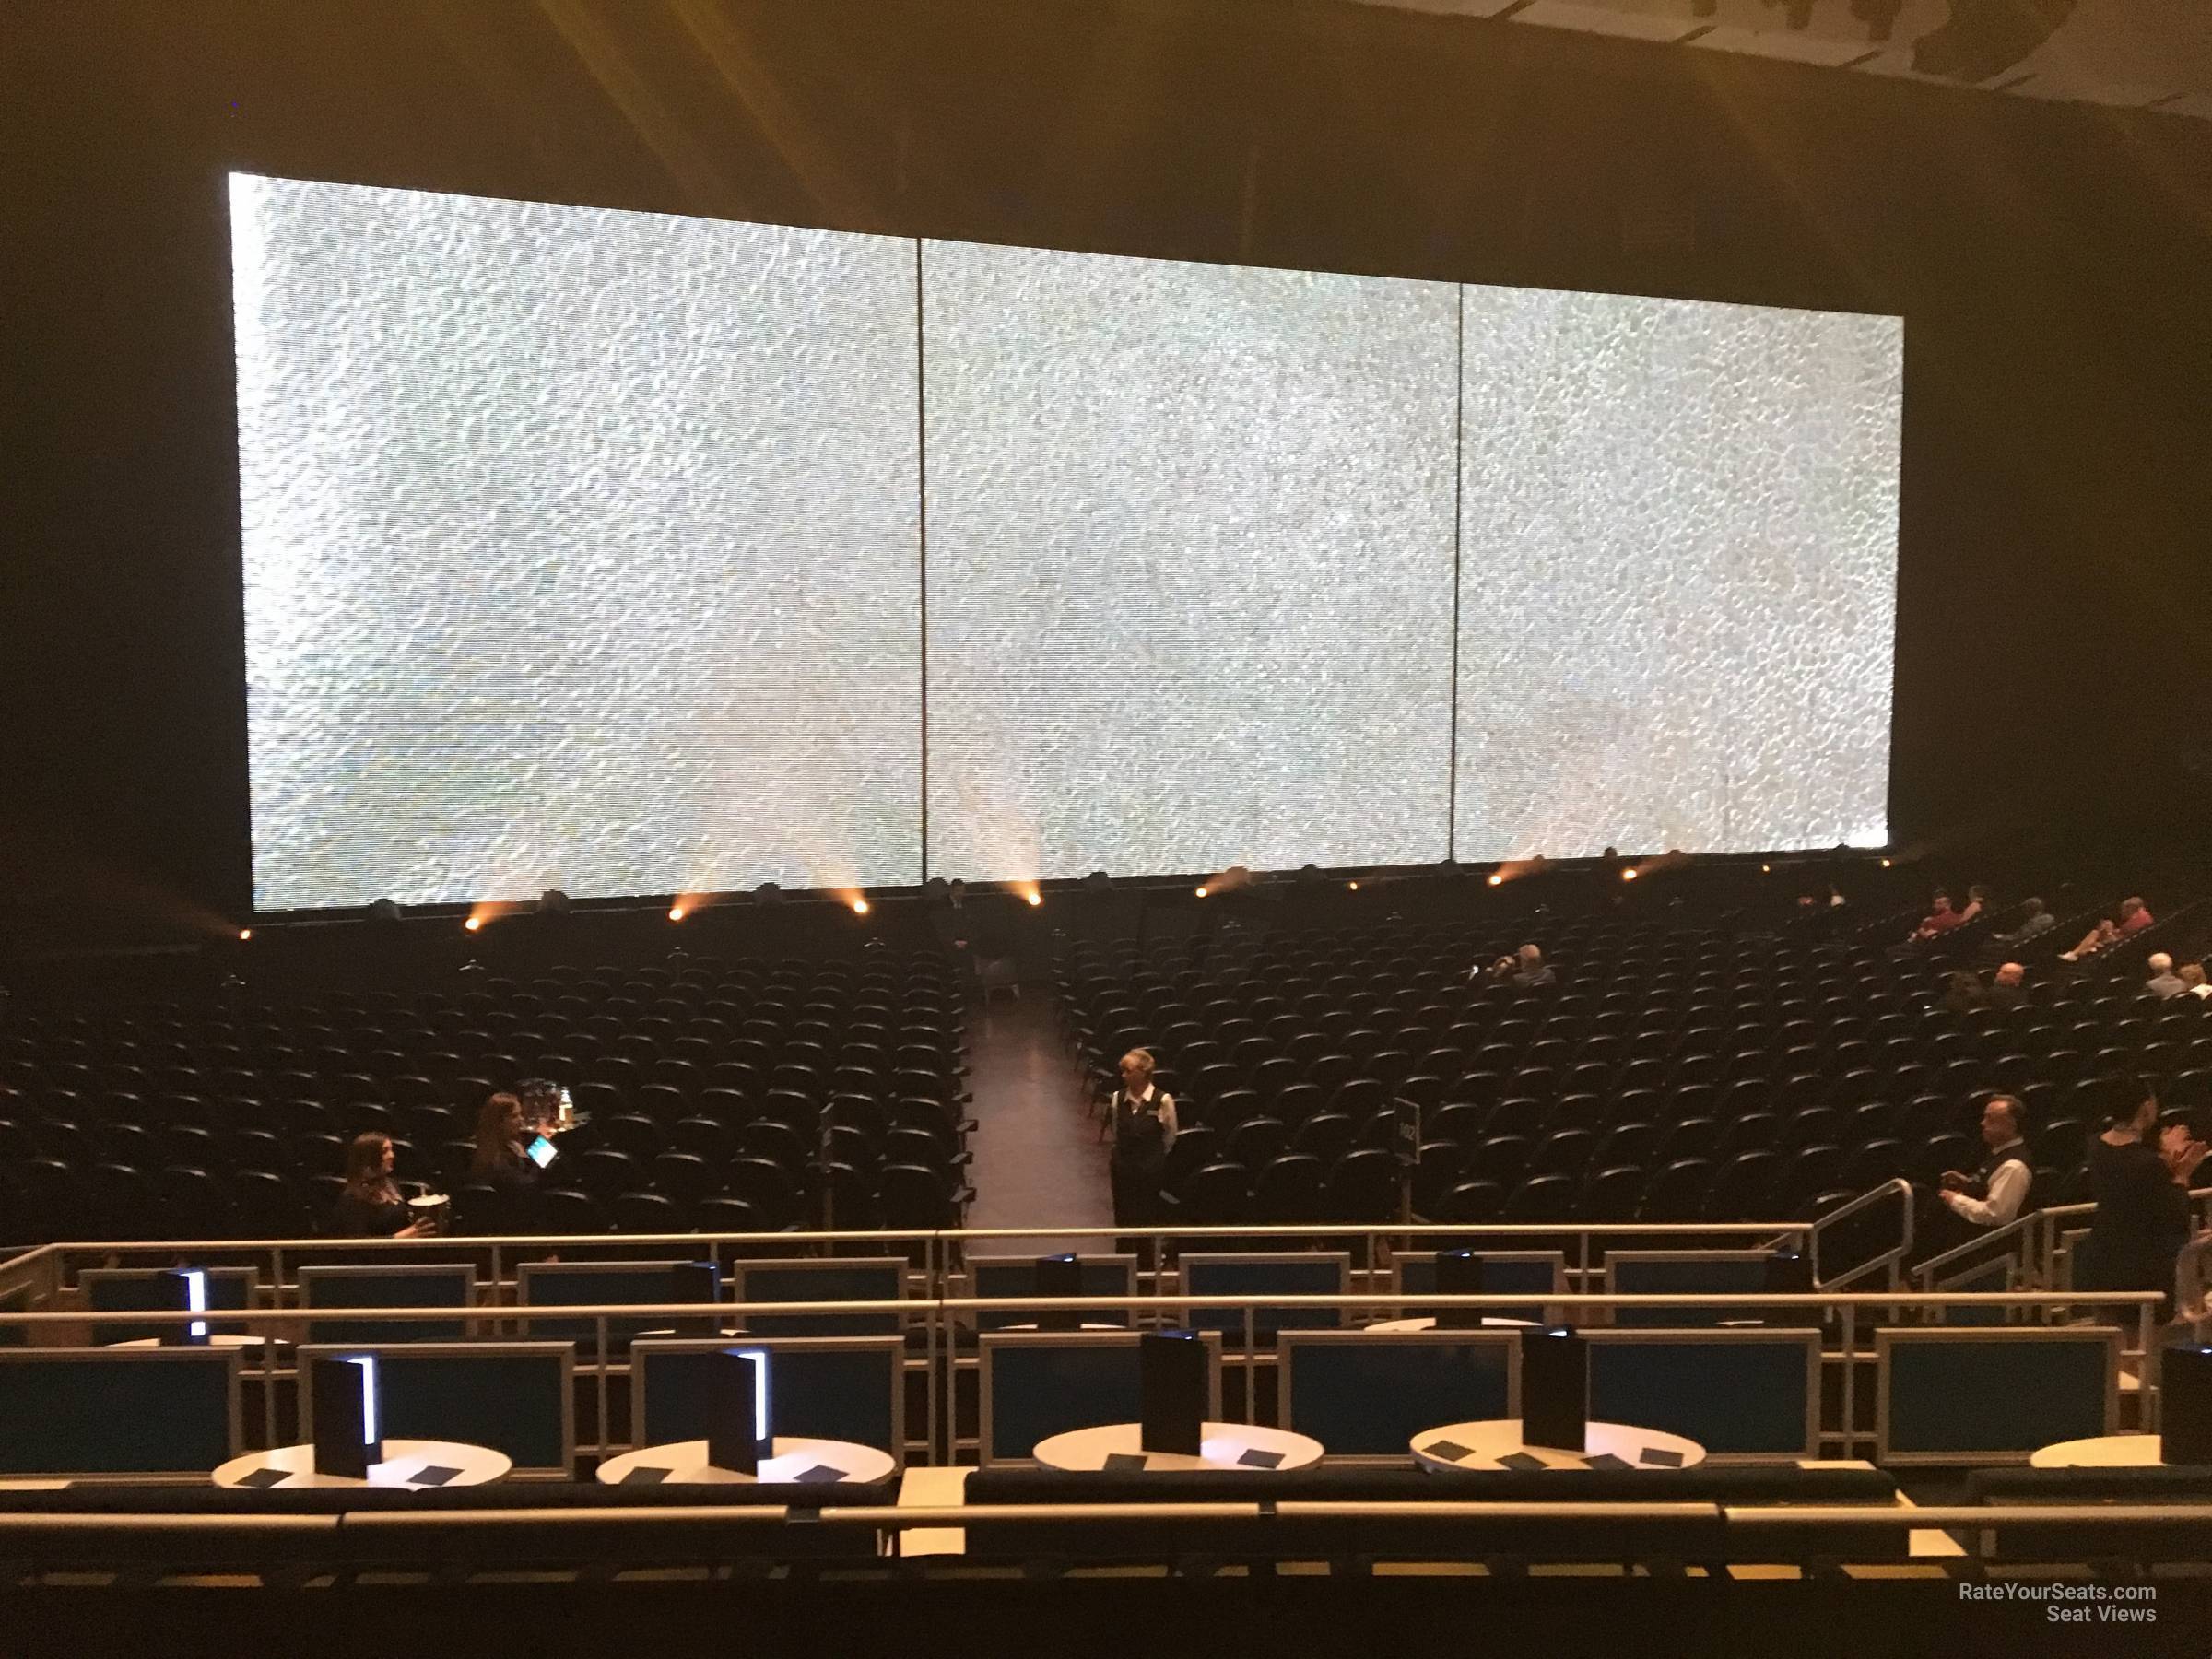 section 204, row k seat view  - dolby live at park mgm